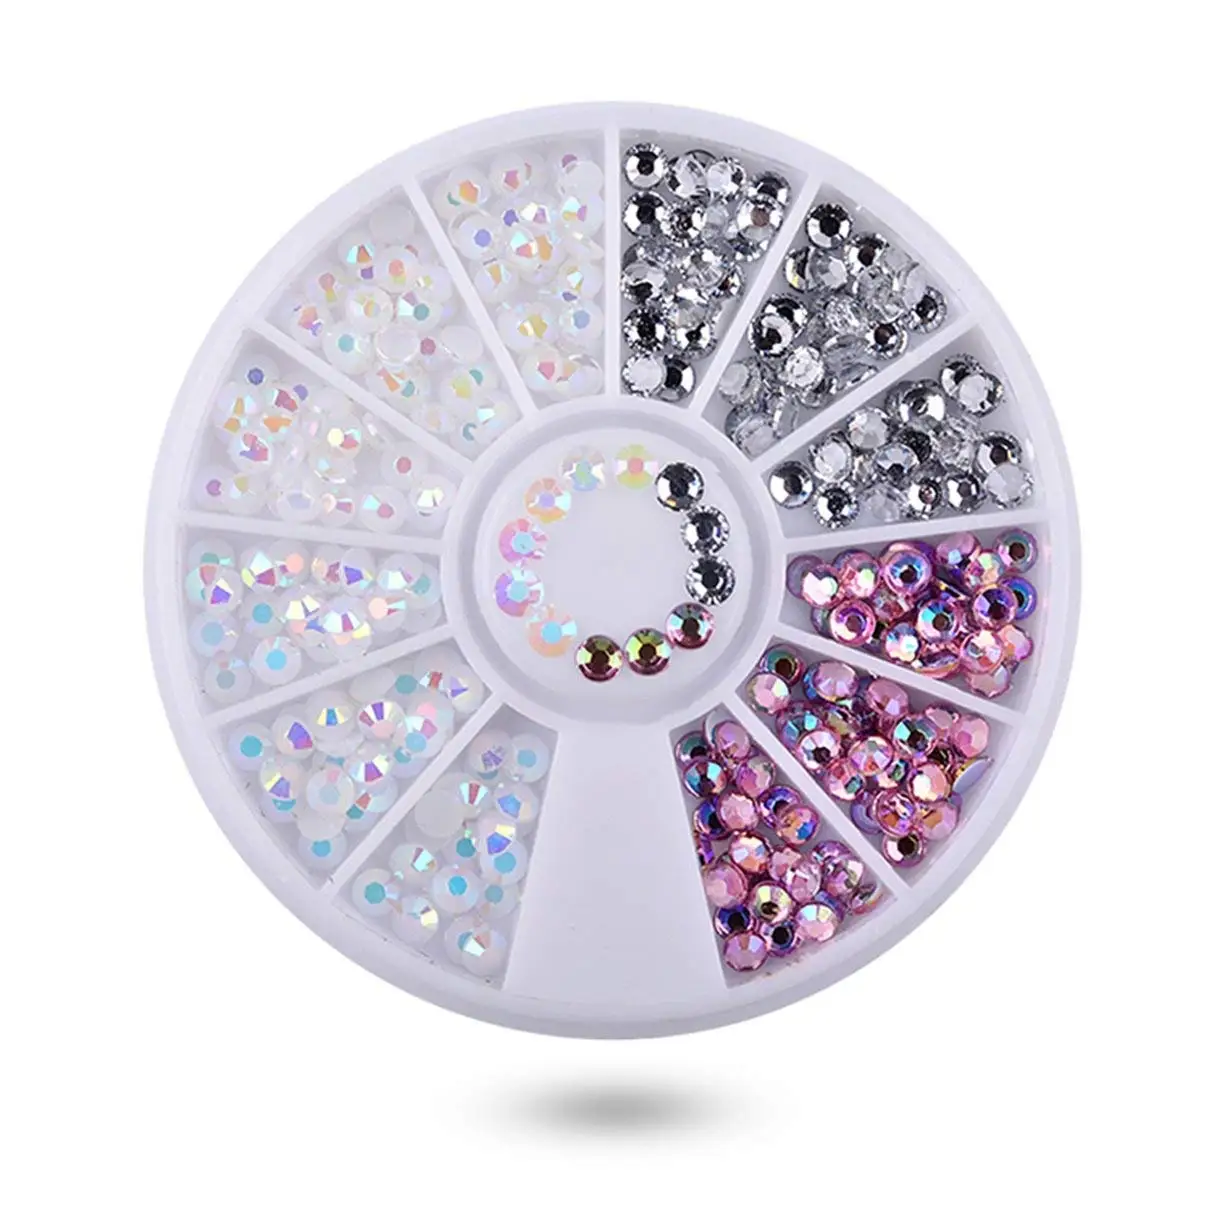 Cheap Snow Nails, find Snow Nails deals on line at Alibaba.com